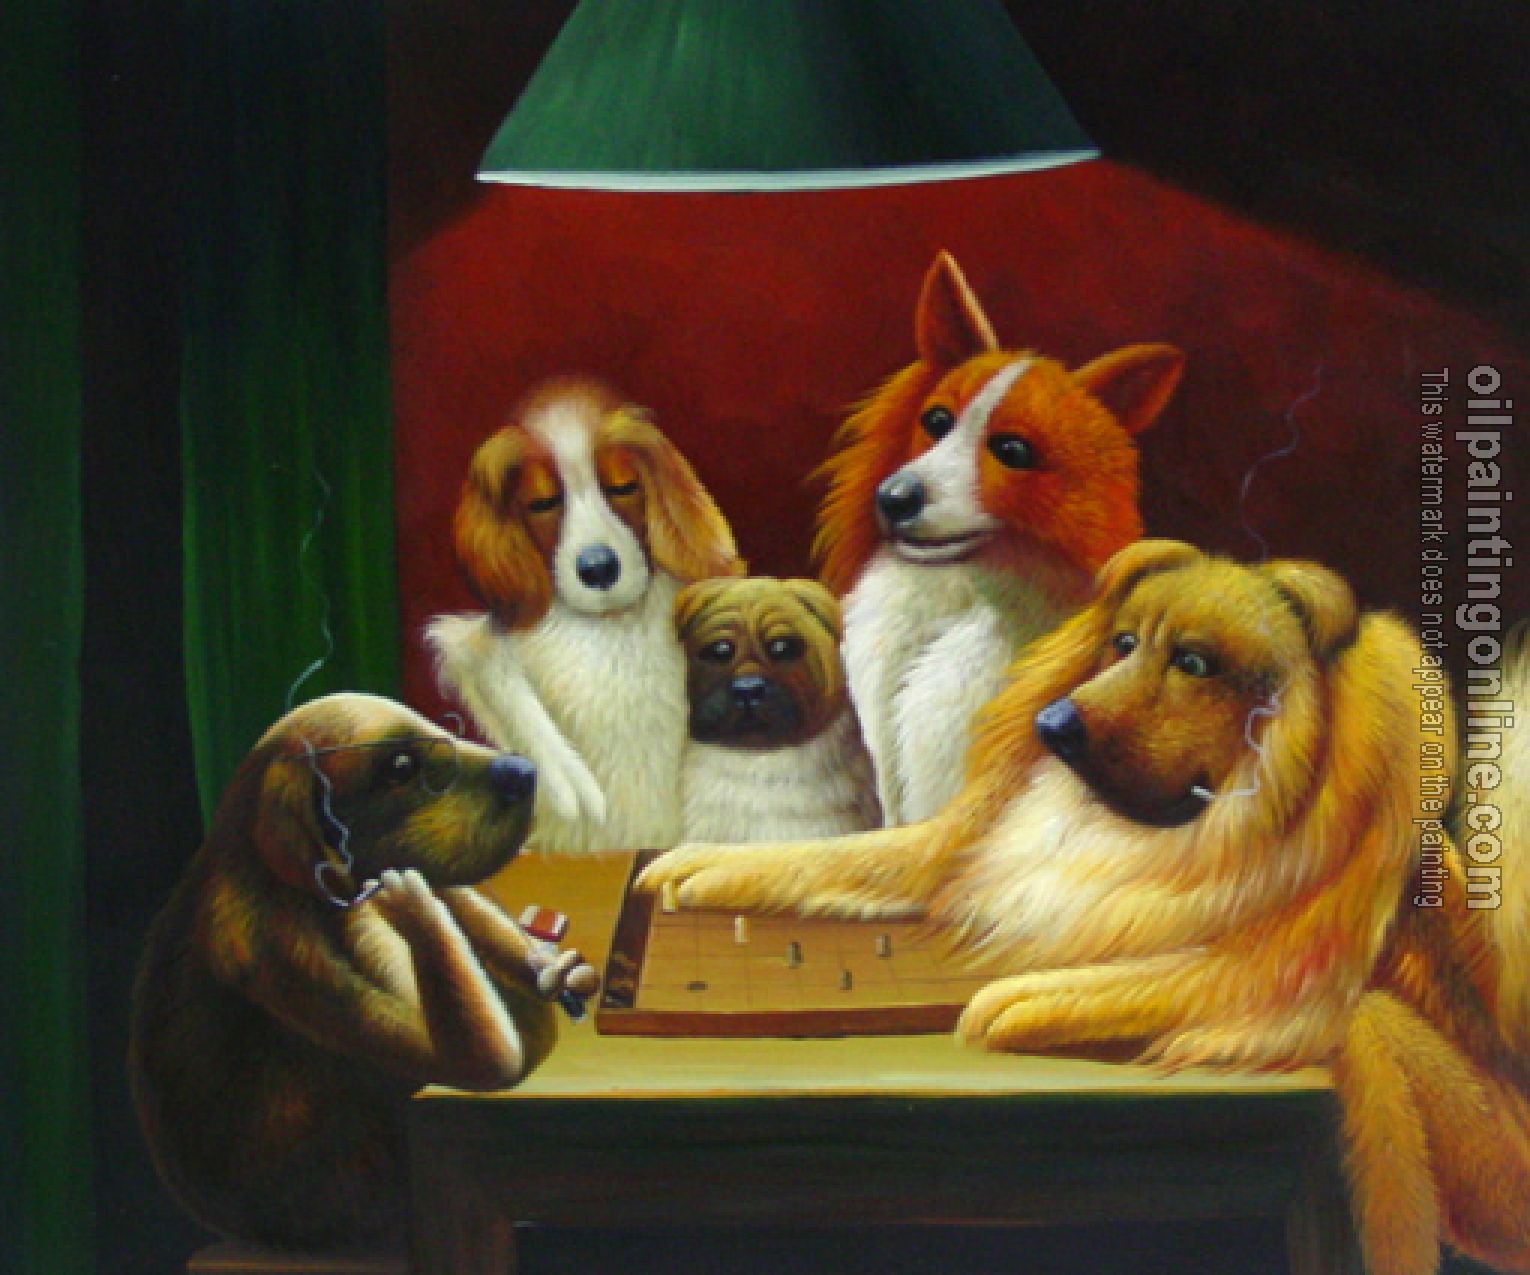 Oil Painting Reproduction - Oil painting of dog